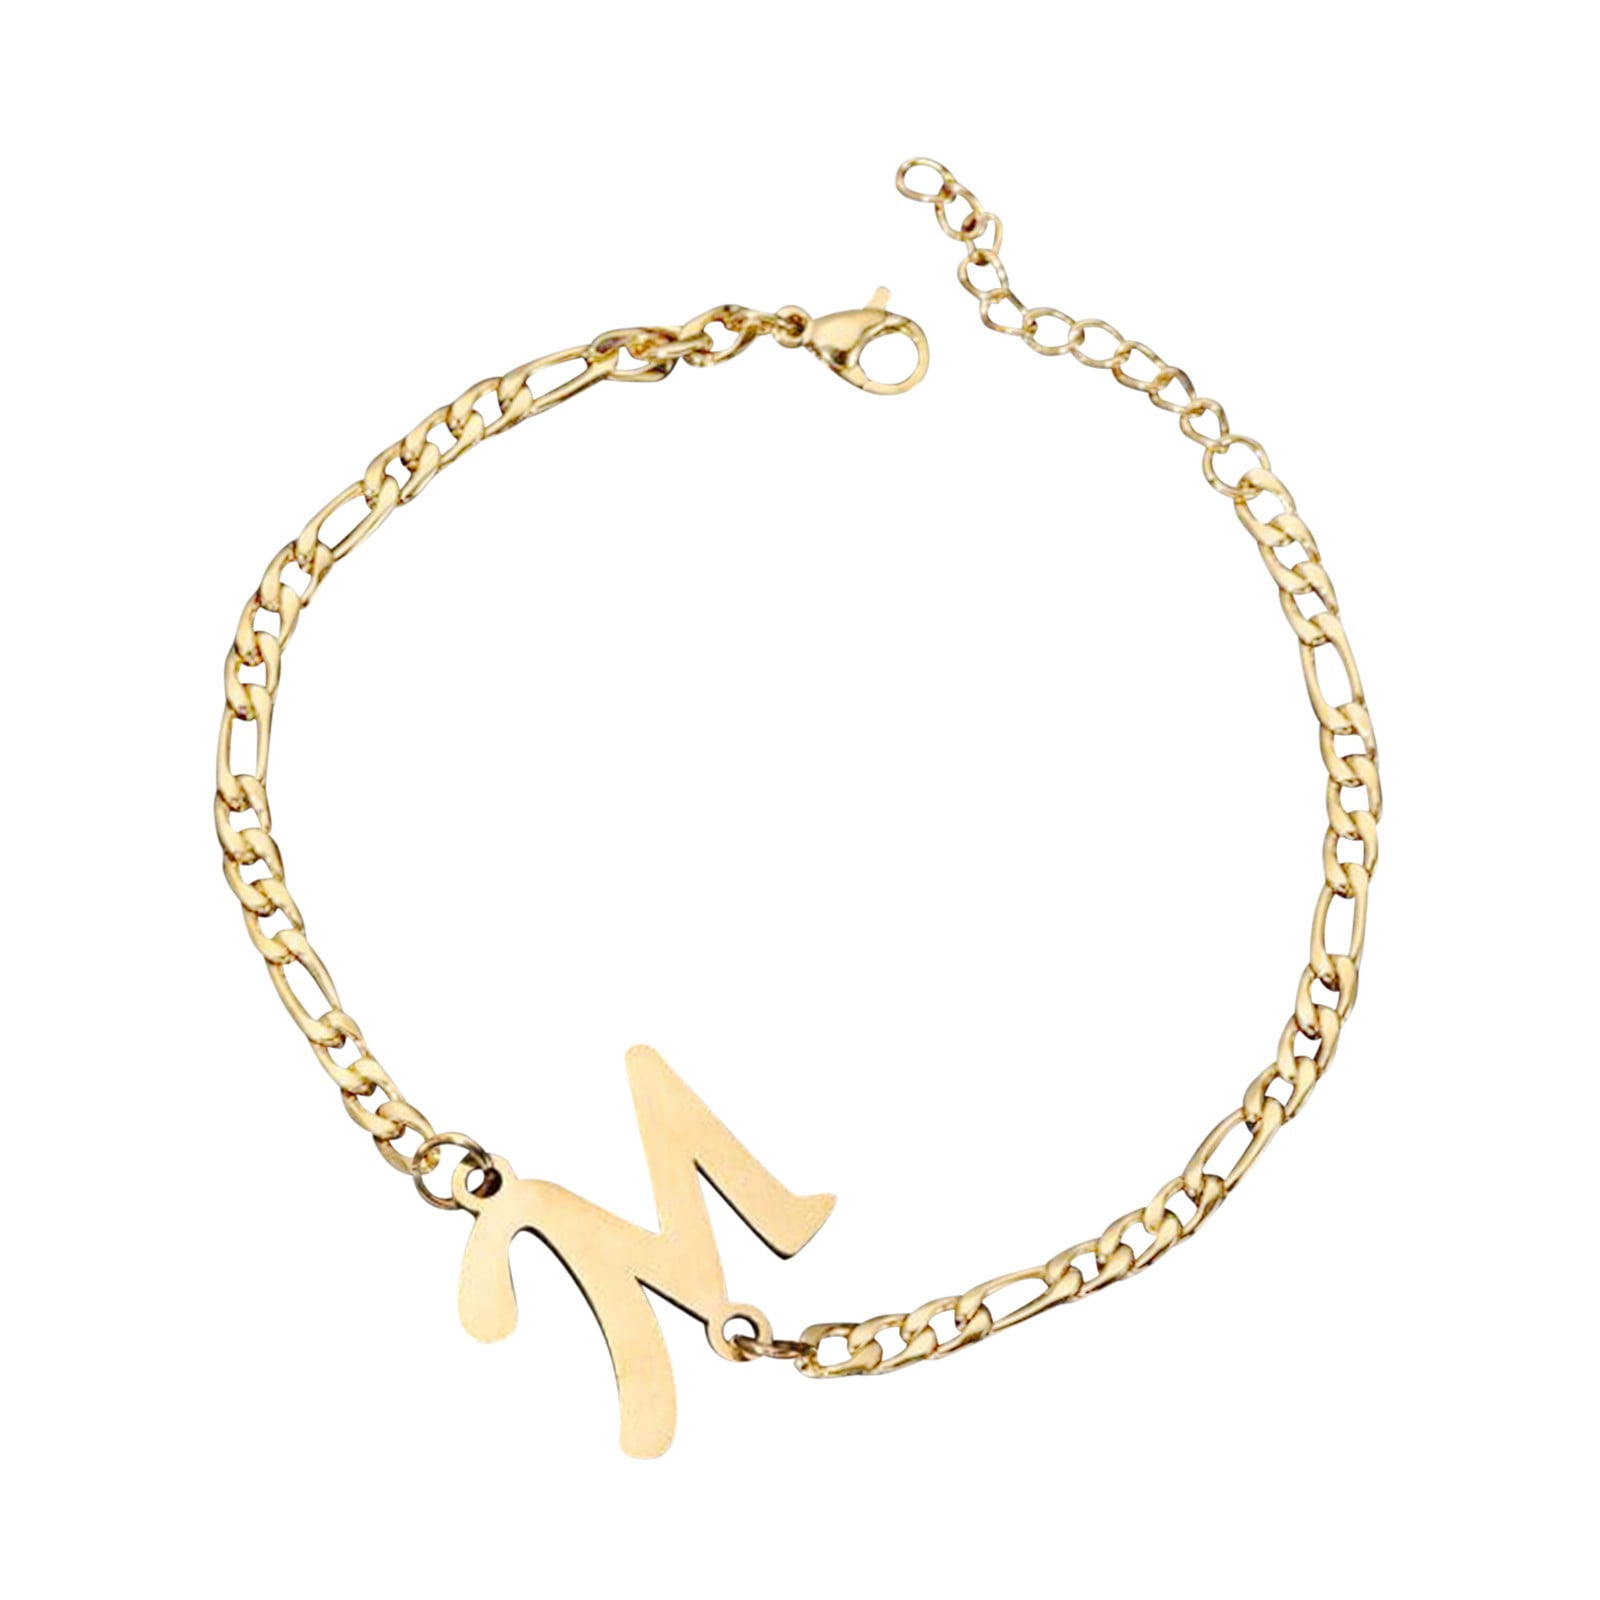 Yuehao Accessories Bracelets Personalized Initial Bracelet Gold Plated Titanium Steel Letter Bracelet Dainty Titanium Steel Bracelet Delicate Disc